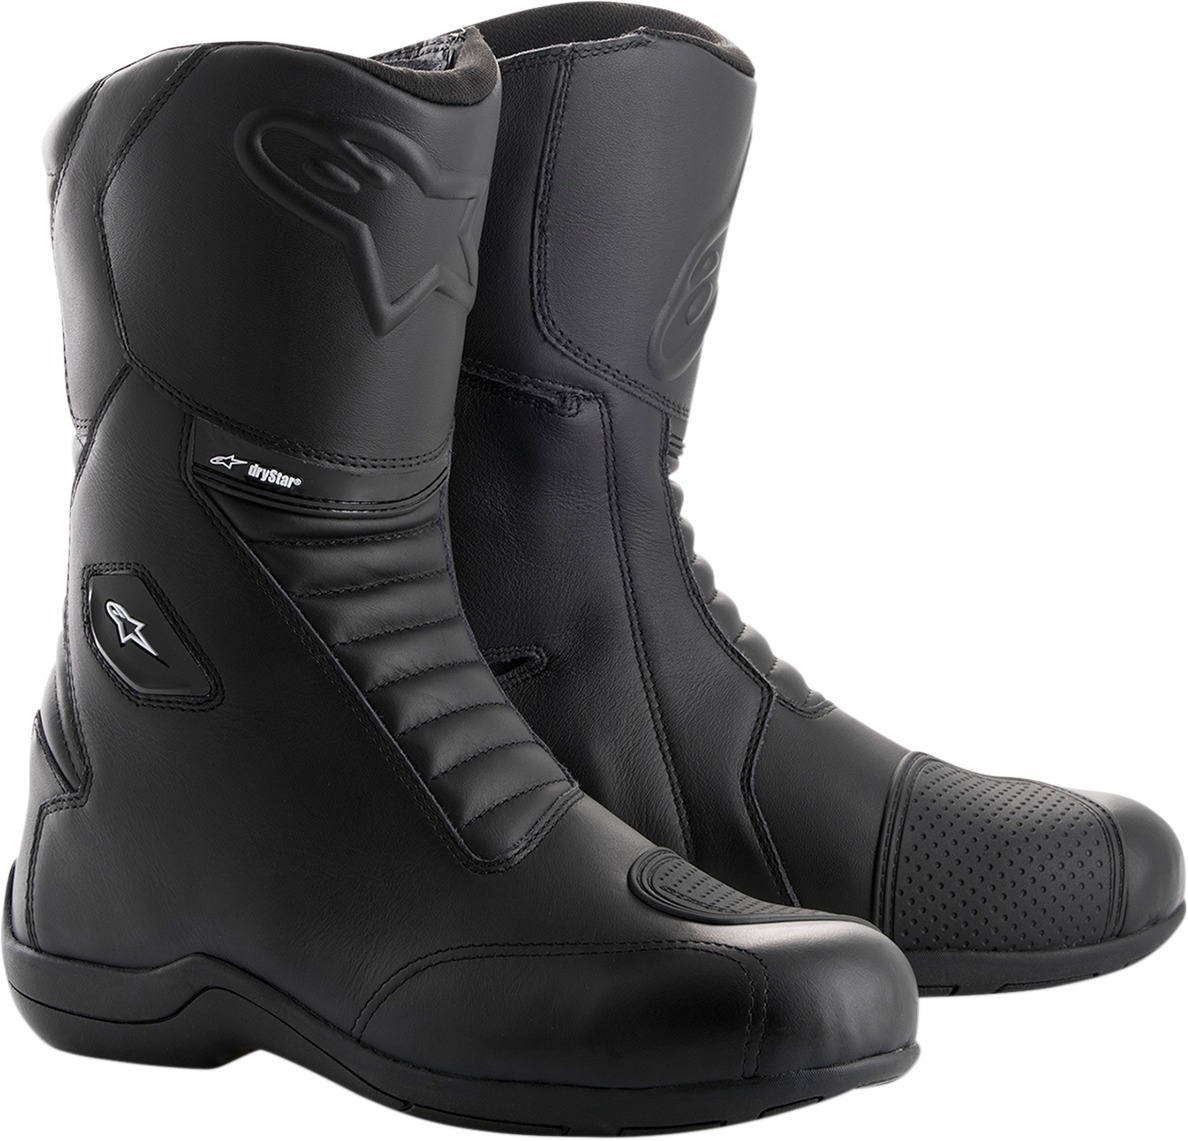 Andes V2 Drystar Street Riding Boots Black US 10.5 - Click Image to Close